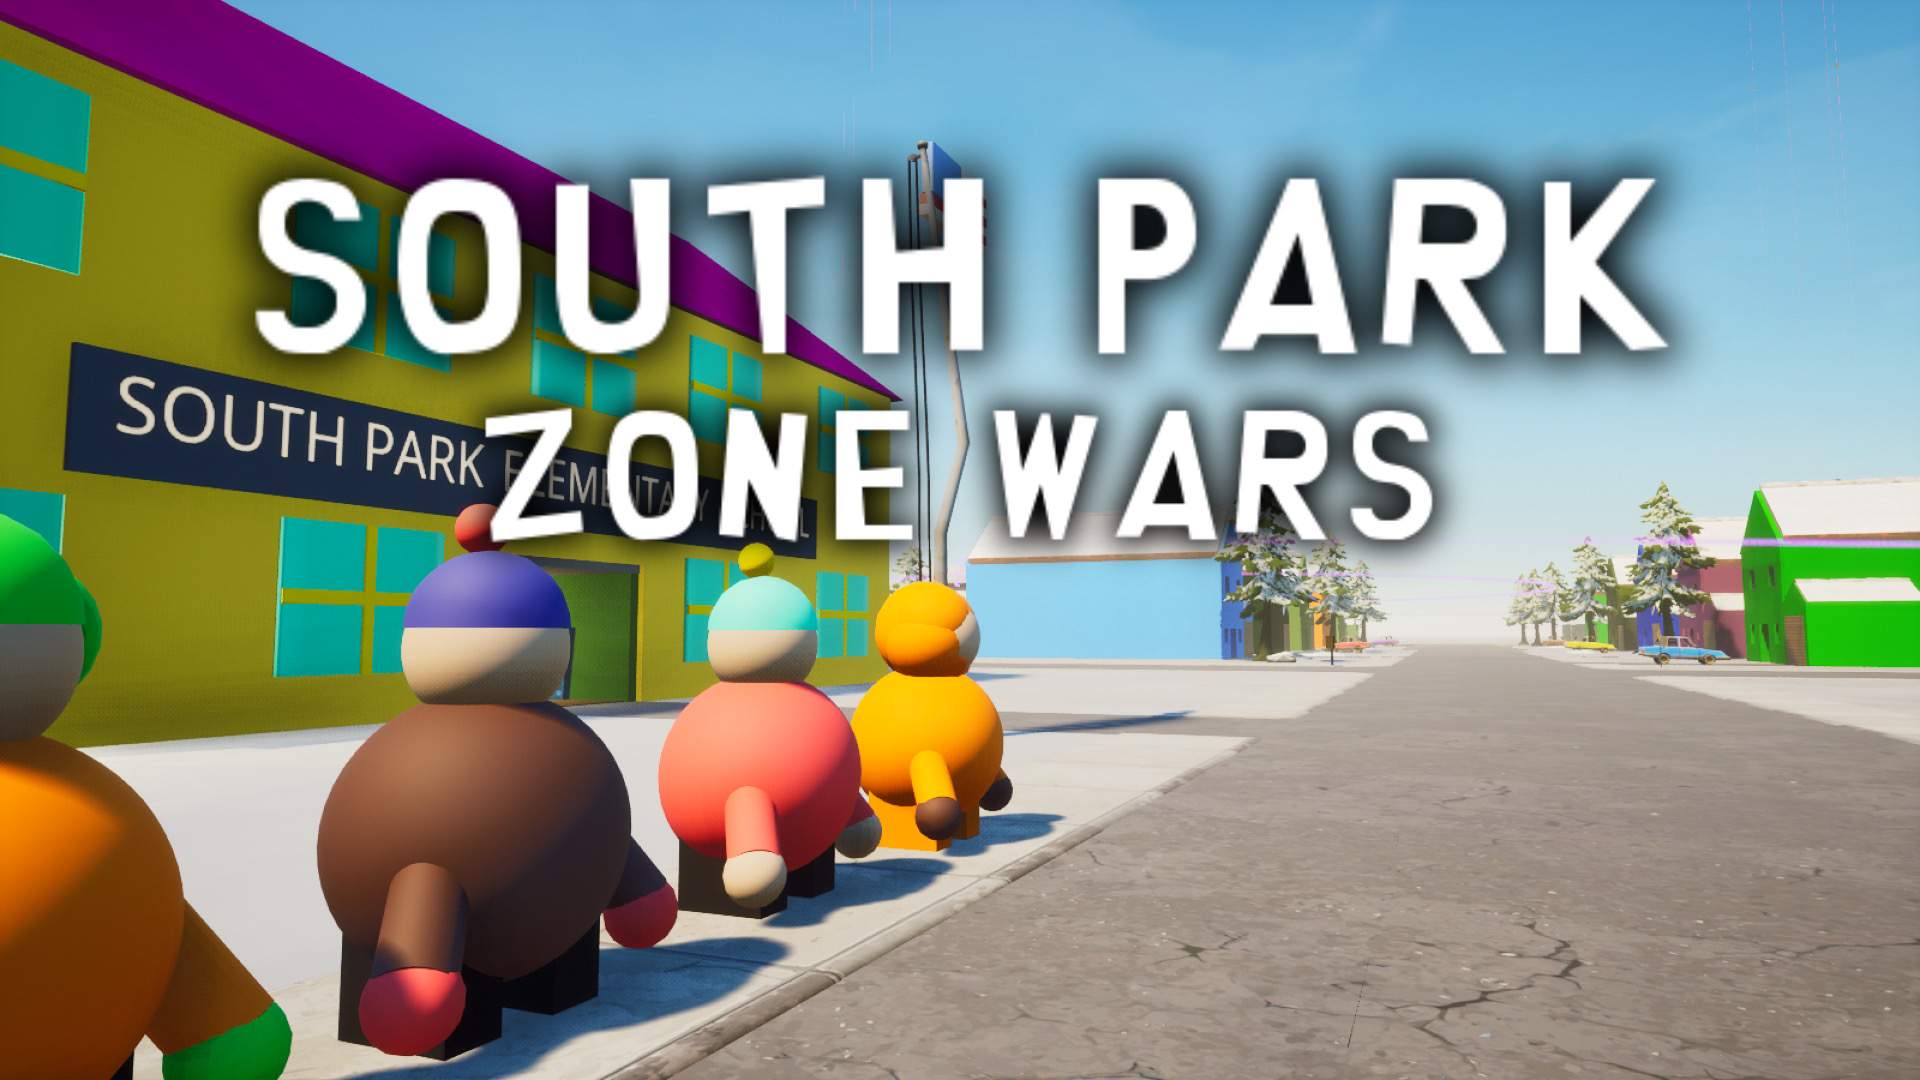 SOUTH PARK ZONE WARS 0710-5299-1162